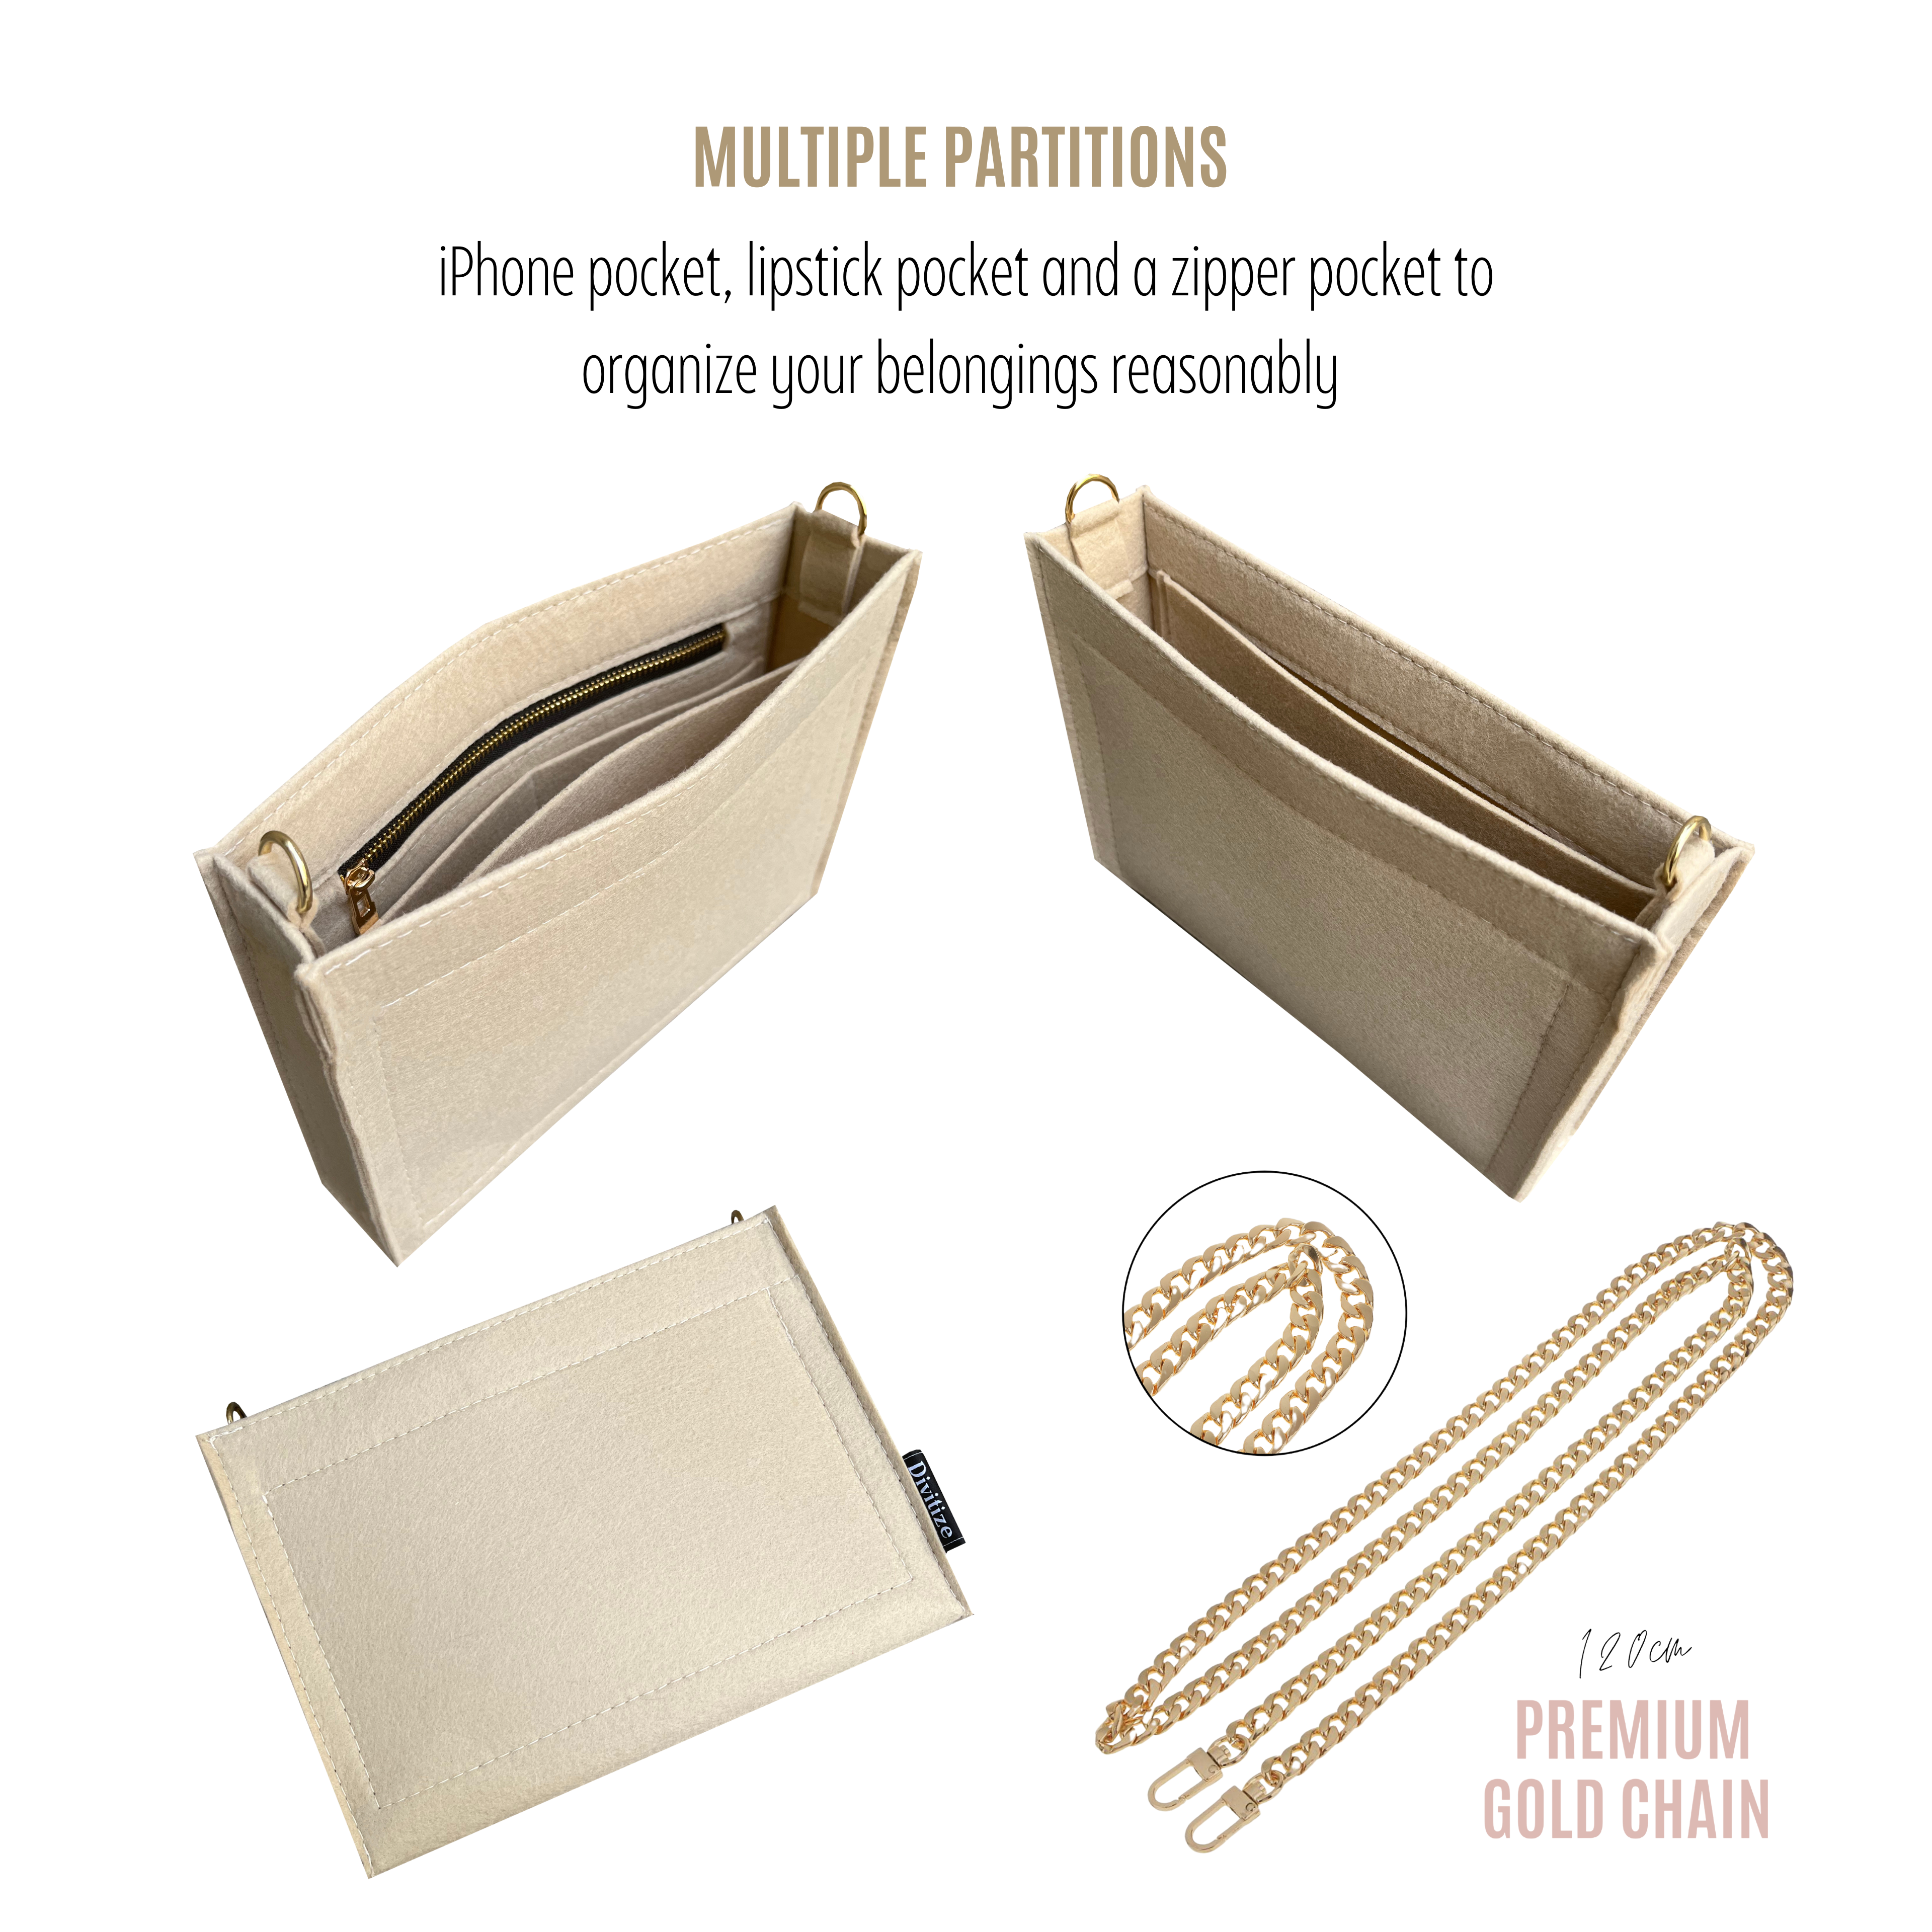 Conversion Kit for Ophidia Pouch (with gold or silver chain)| Accessory for Gucci Swing | Gucci Strap | Designer Purse Insert | Gucci Handbag Strap | Bag Insert Organizer | Gucci Swing Strap | Luxury Bag Accessory | Bag Protector”